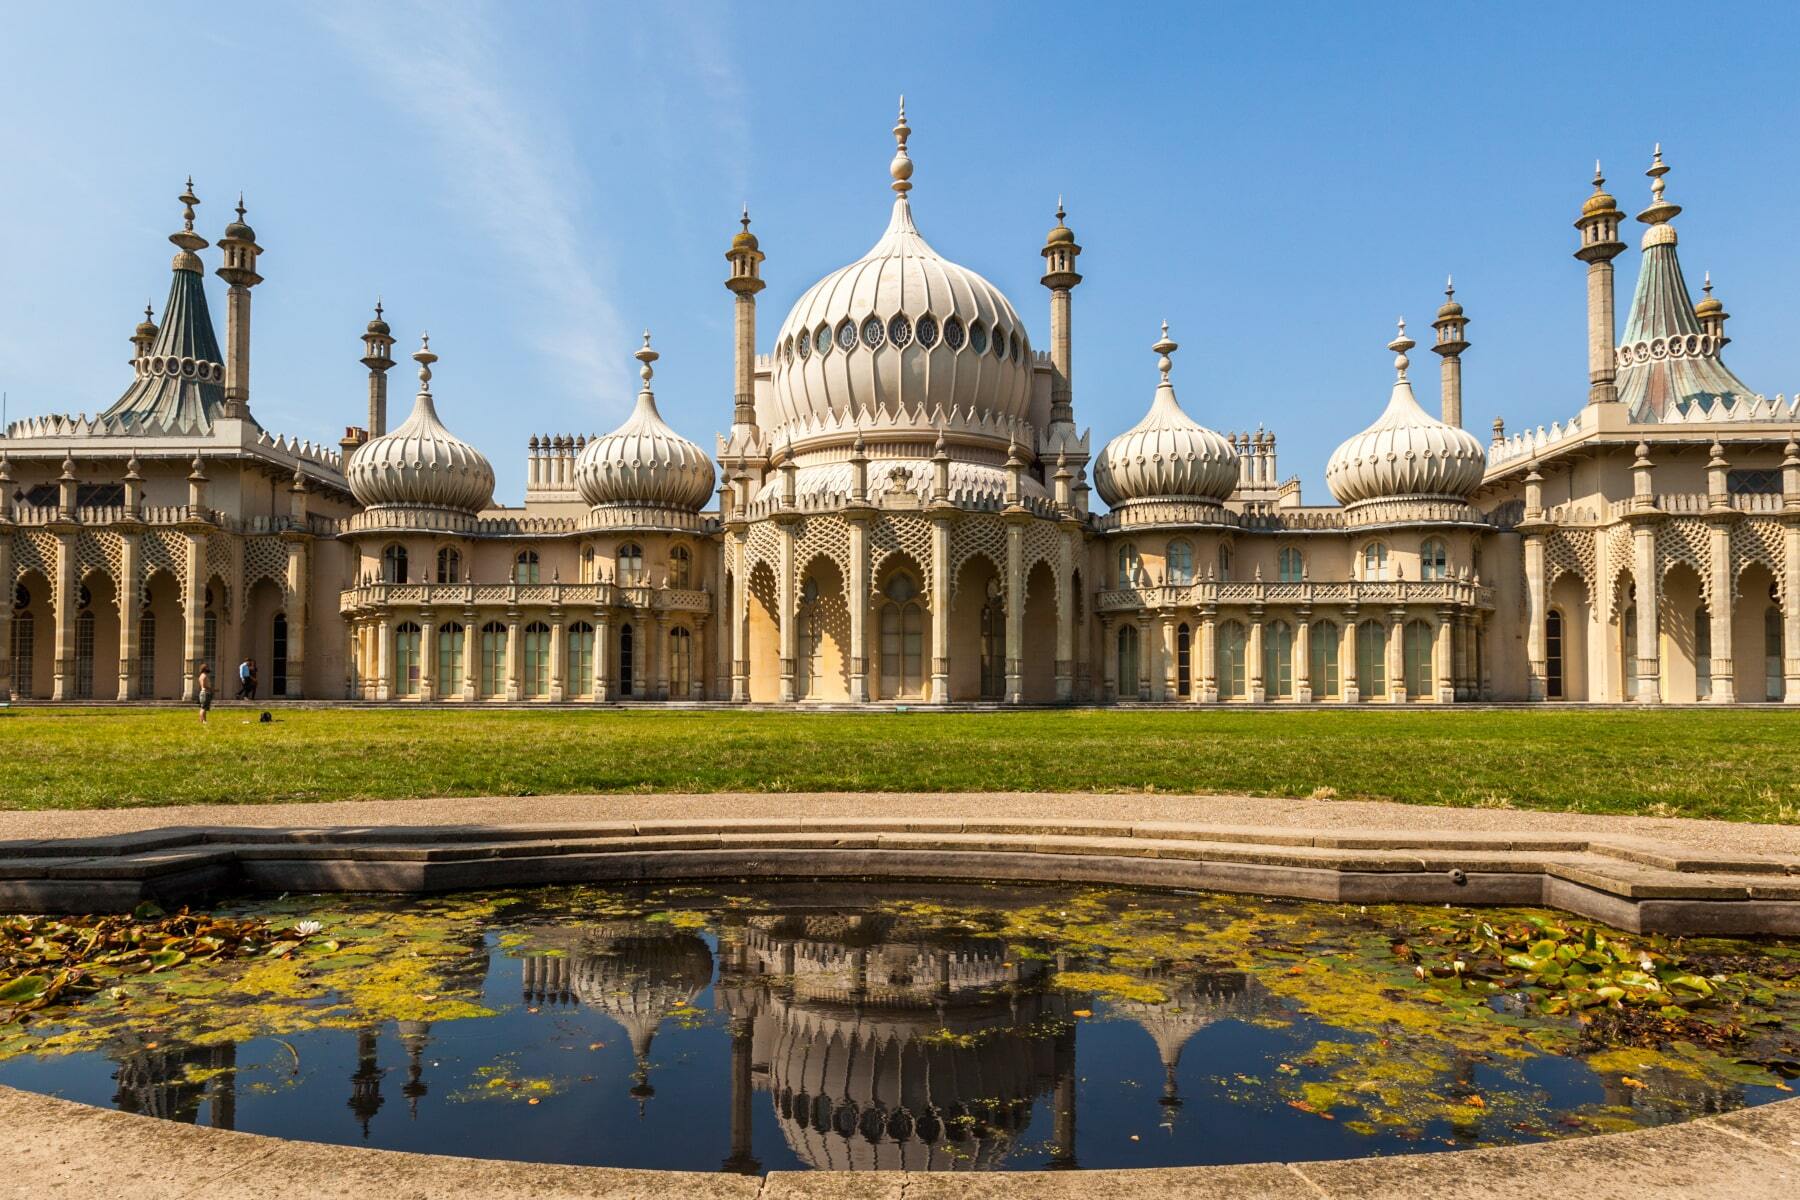 <p>Although Brighton is popular for its waterfront and fun attractions, you’ll also want to visit the <a href="https://brightonmuseums.org.uk/visit/royal-pavilion-garden/" class="atom_link atom_valid" rel="noreferrer noopener">Royal Pavilion</a>, a building inspired by a blend of Indian, Mughal, Chinese, and European architecture. Even though it diverges from other buildings we’re accustomed to seeing in England, you can still enjoy a cup of traditional afternoon tea in the tearoom.</p>